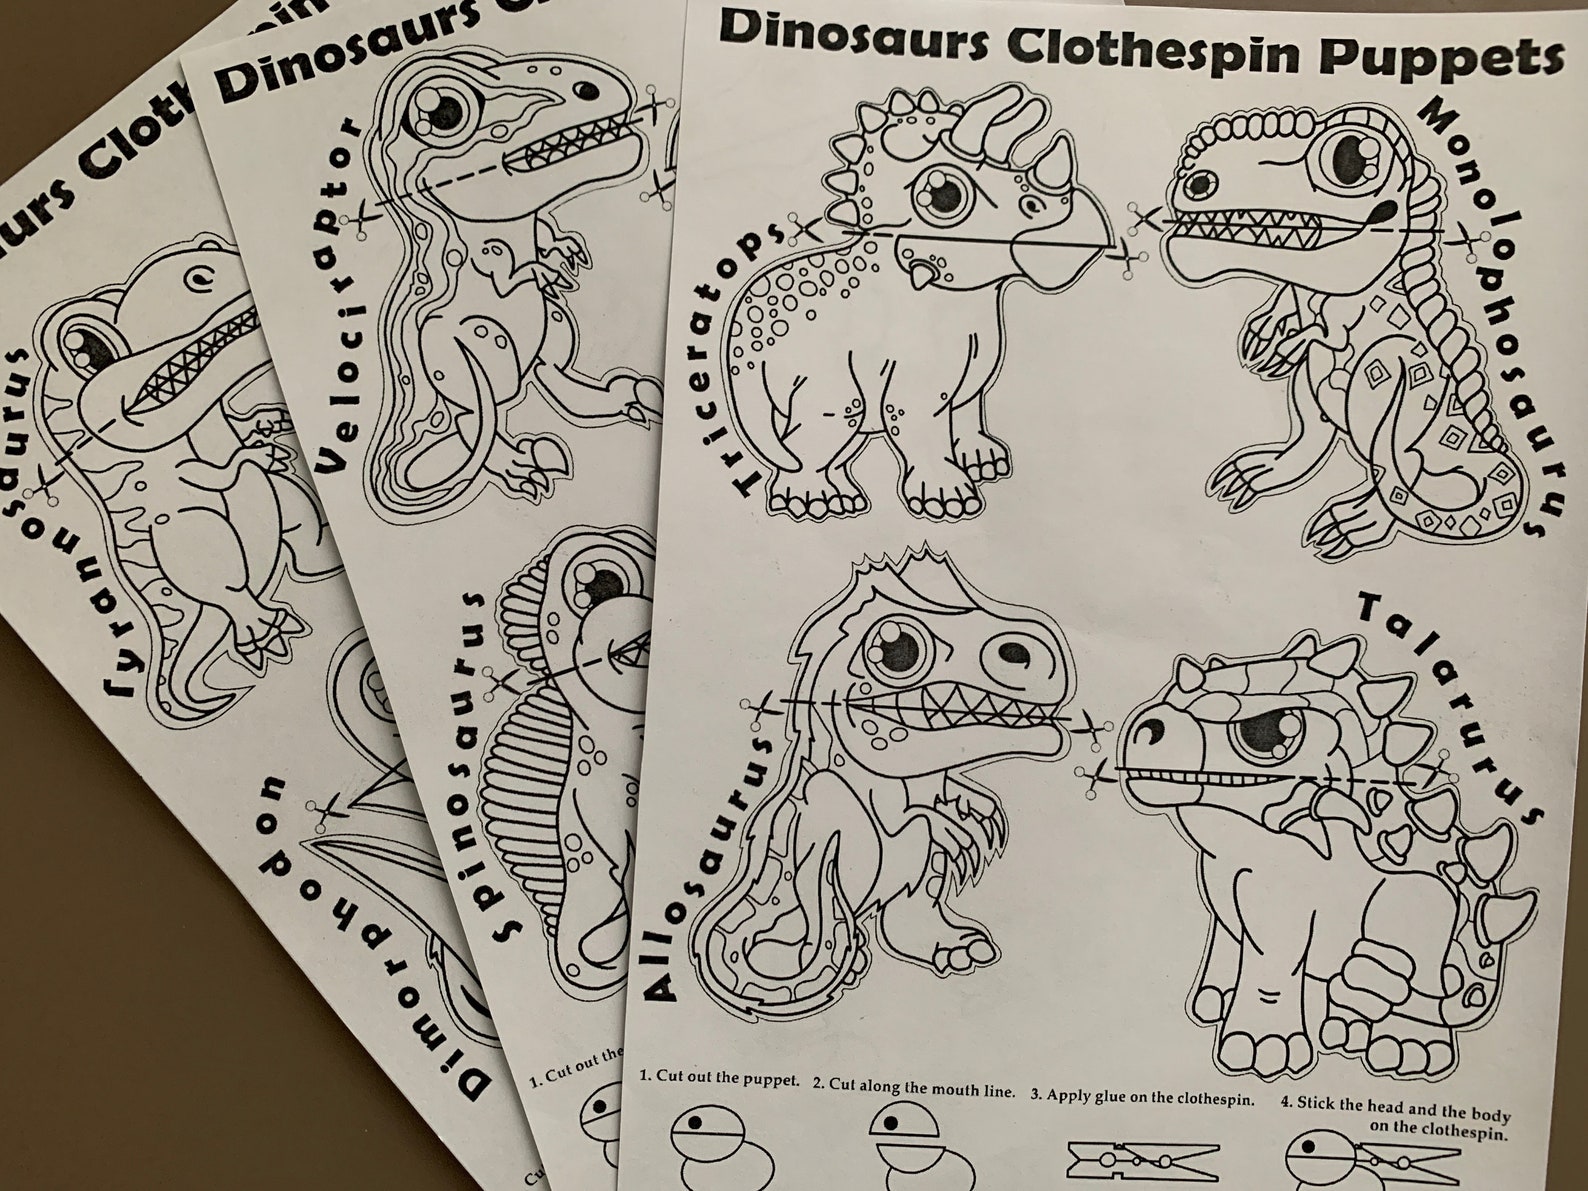 dinosaurs-clothespin-puppets-coloring-pages-pdf-pattern-etsy